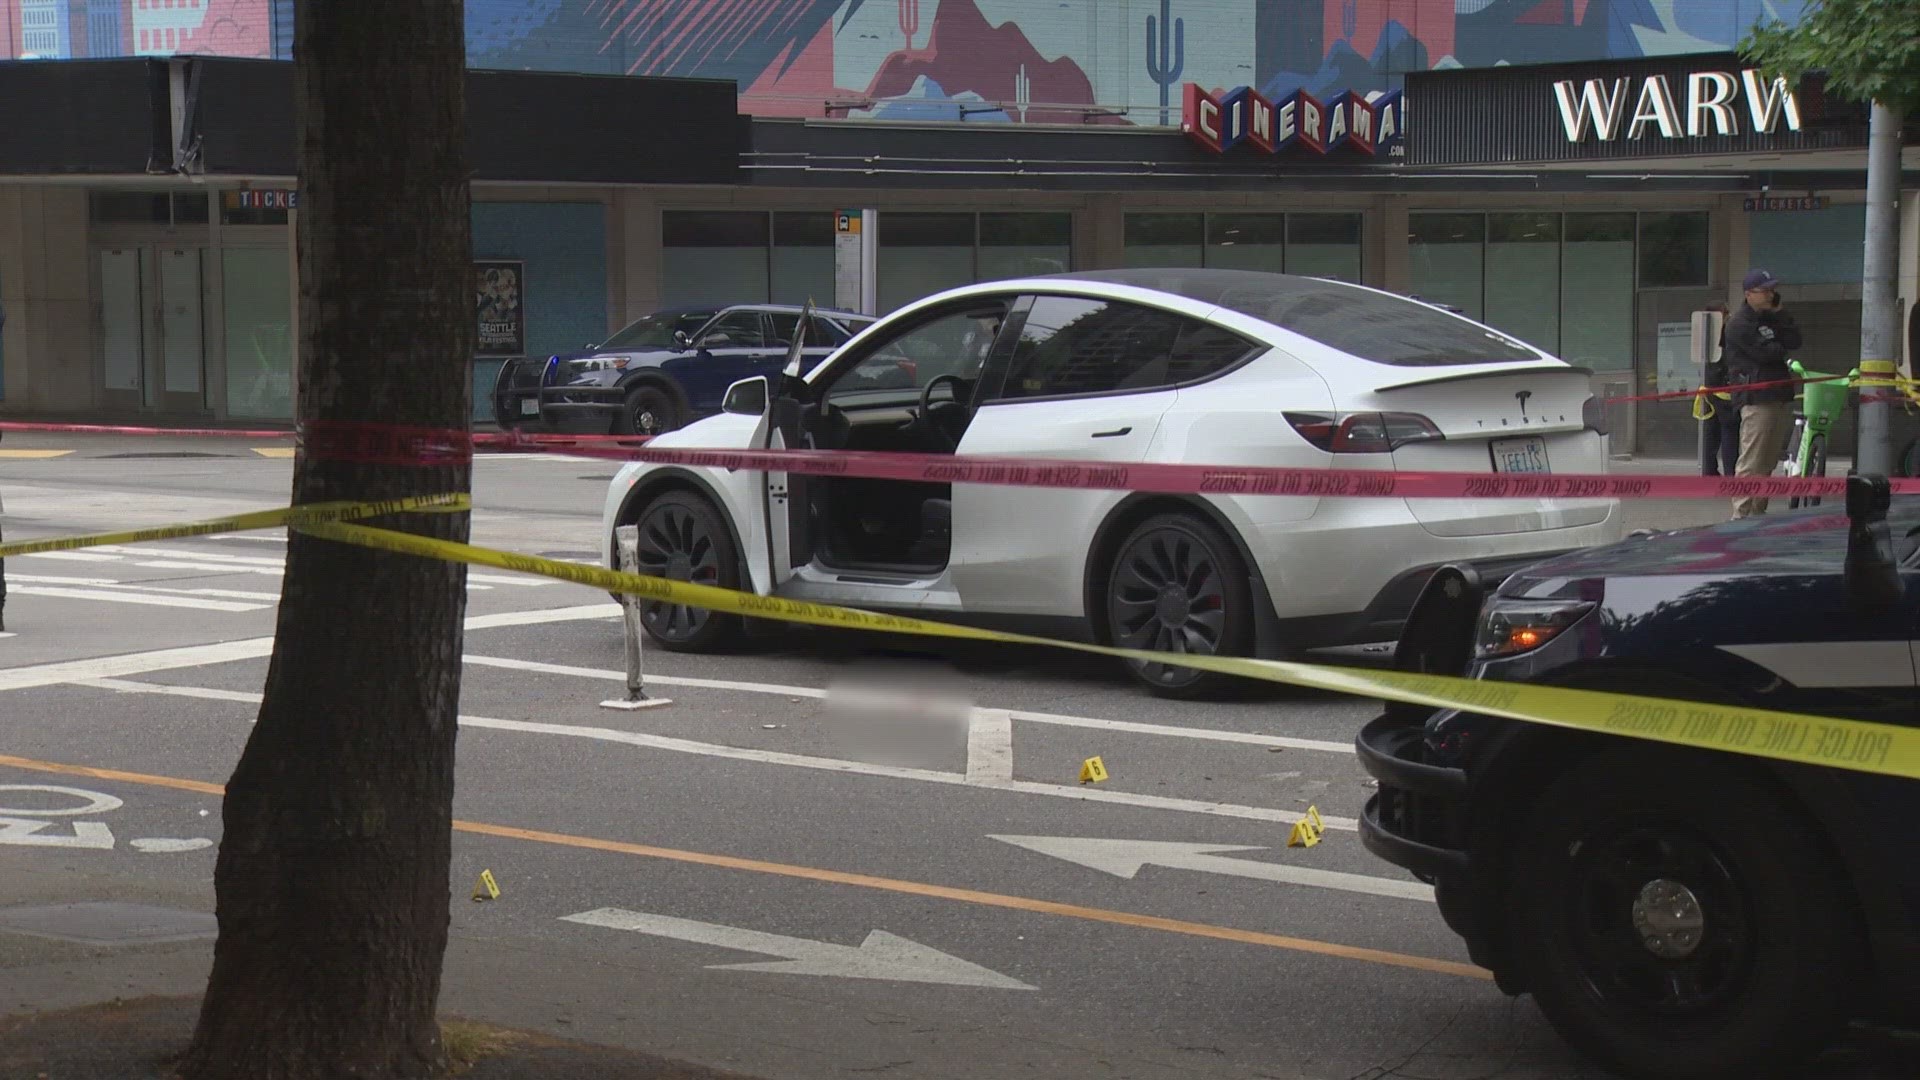 A man and a pregnant woman were taken to Harborview Medical Center after being shot at Fourth Avenue and Lenora Street.